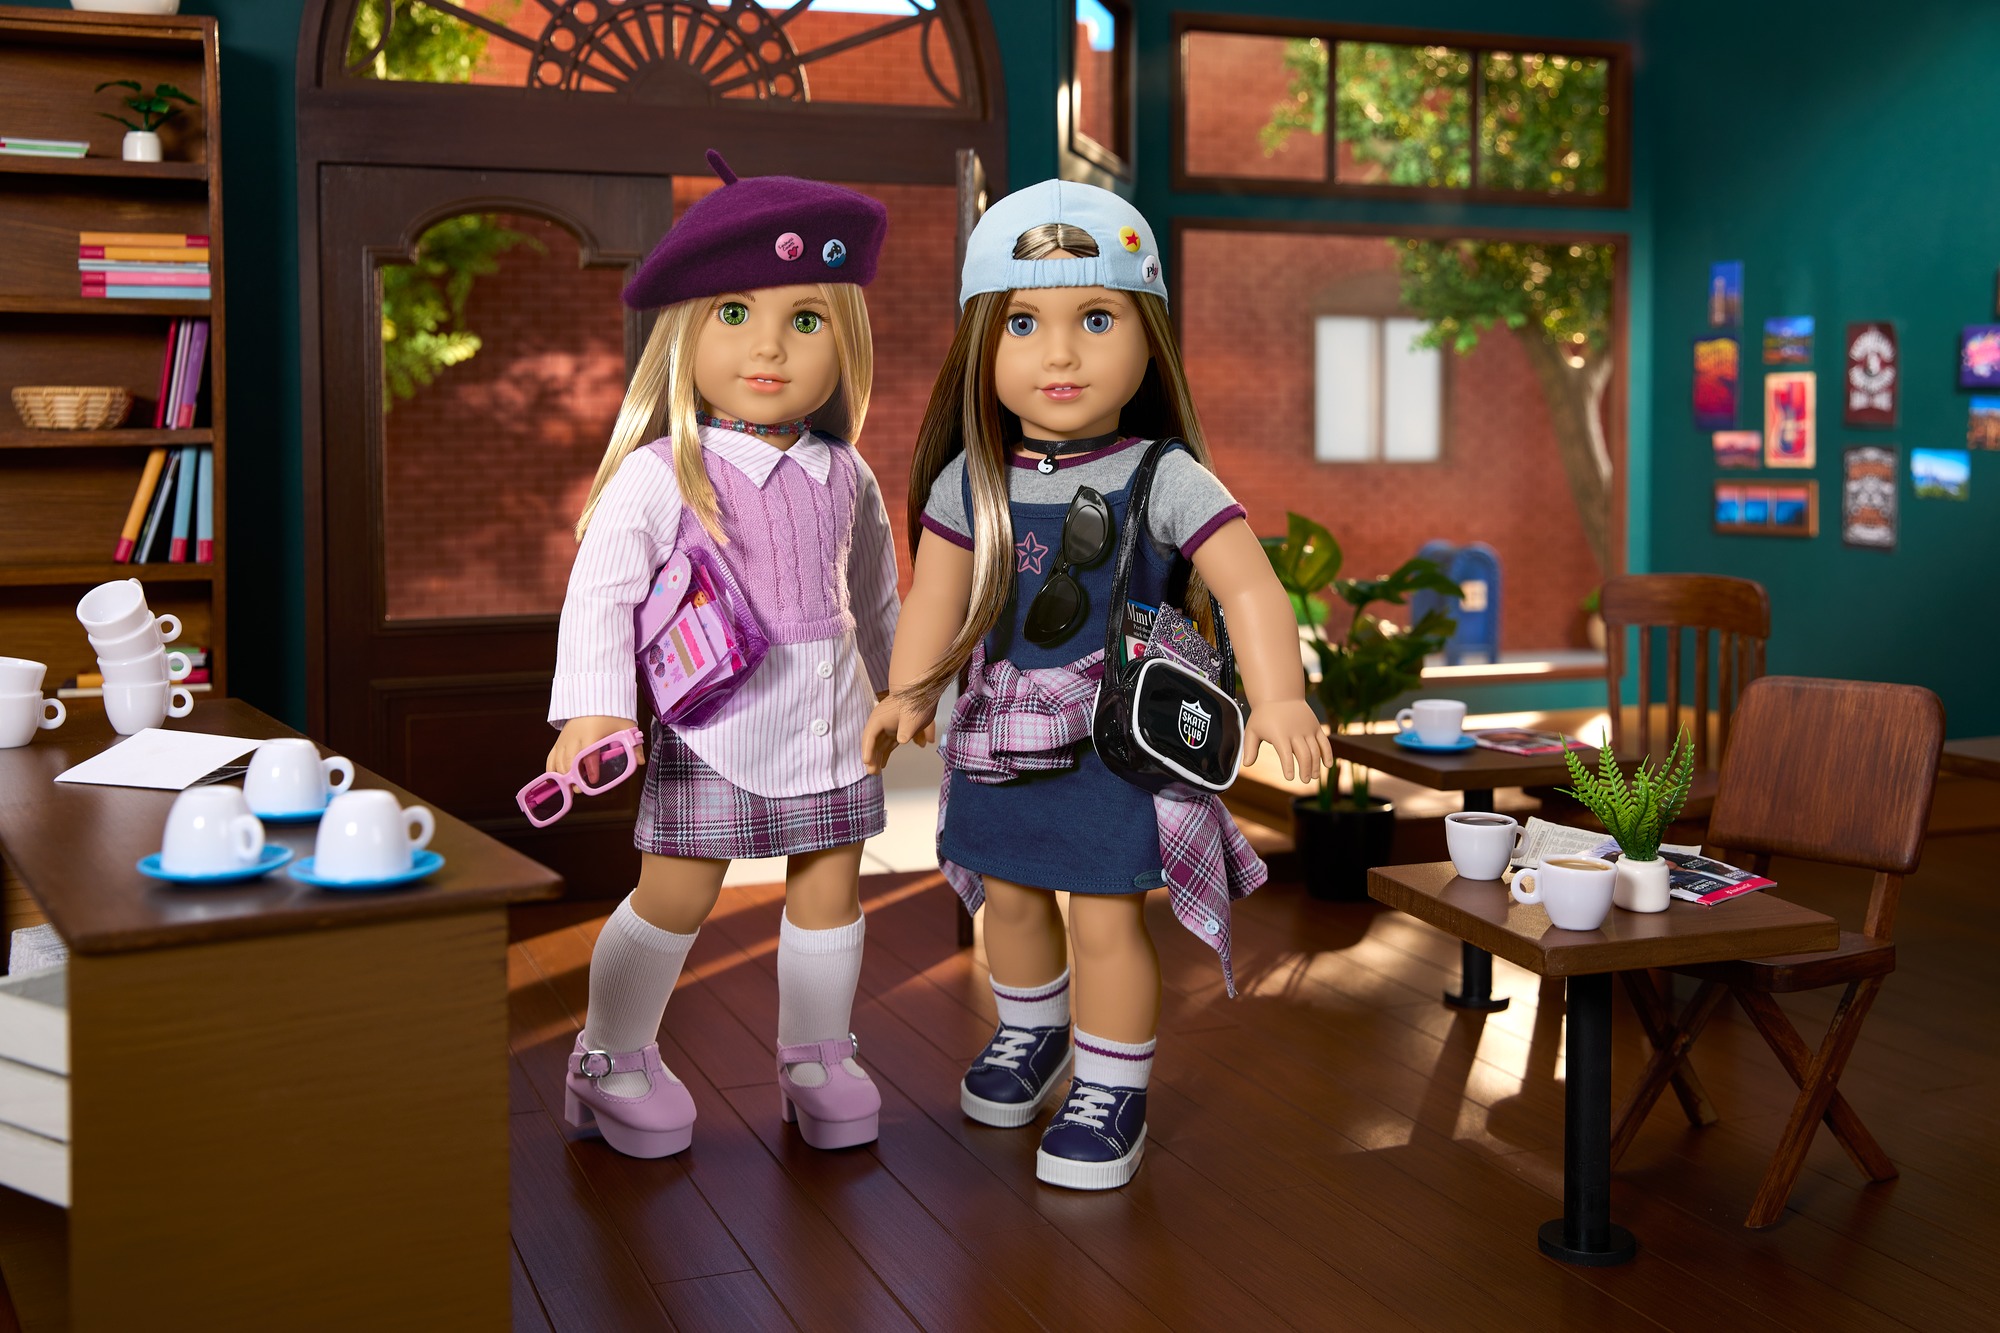 American Girl unveils twin dolls inspired by '90s nostalgia - ABC News